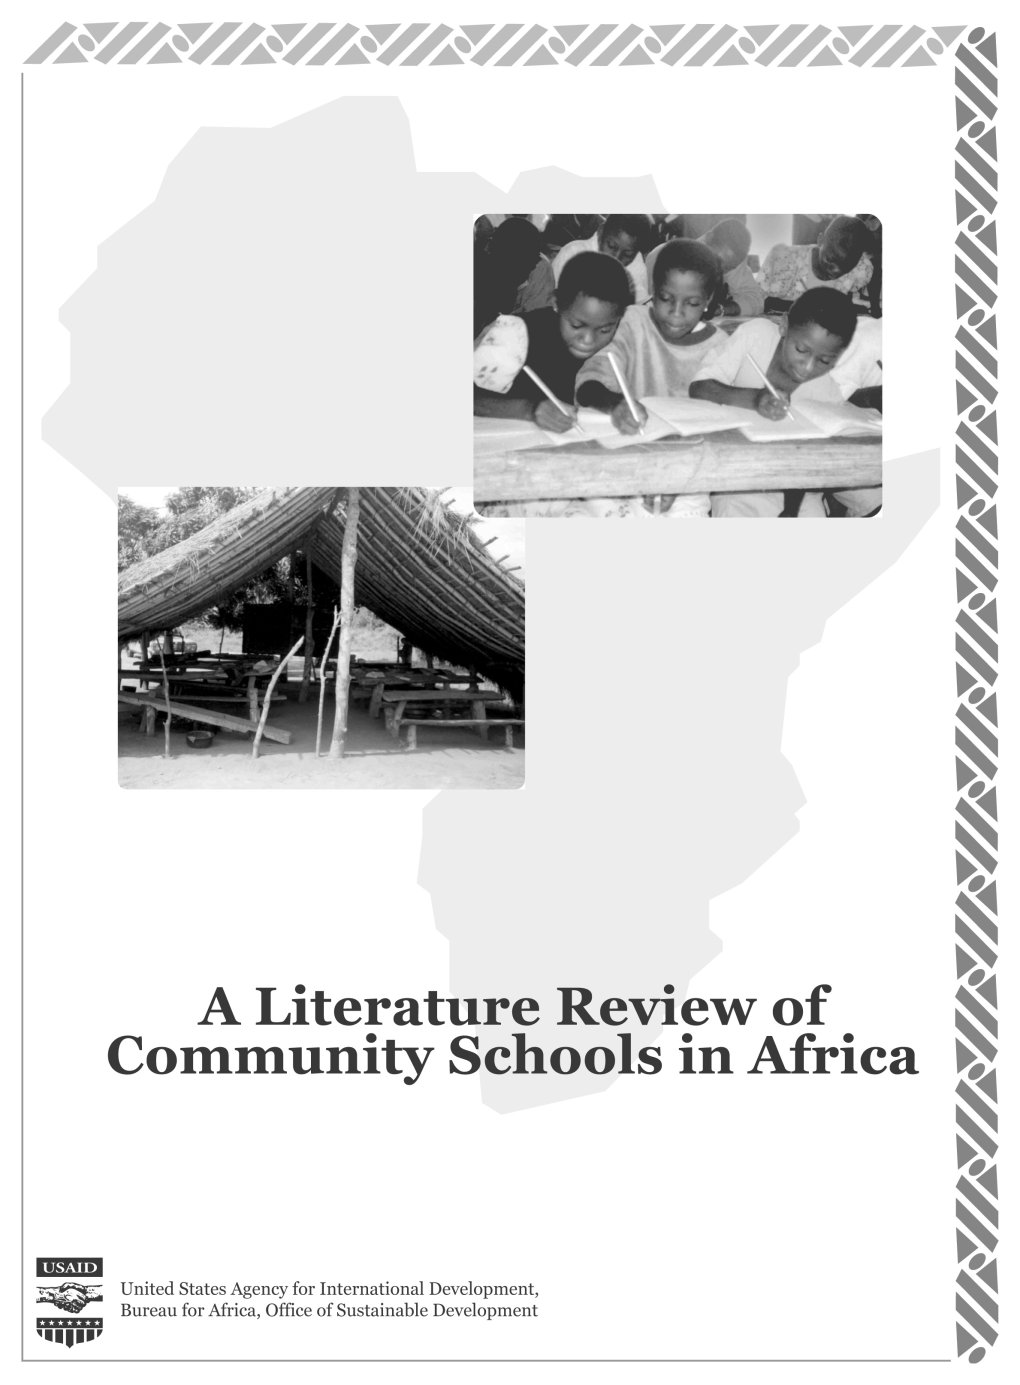 A Literature Review of Community Schools in Africa